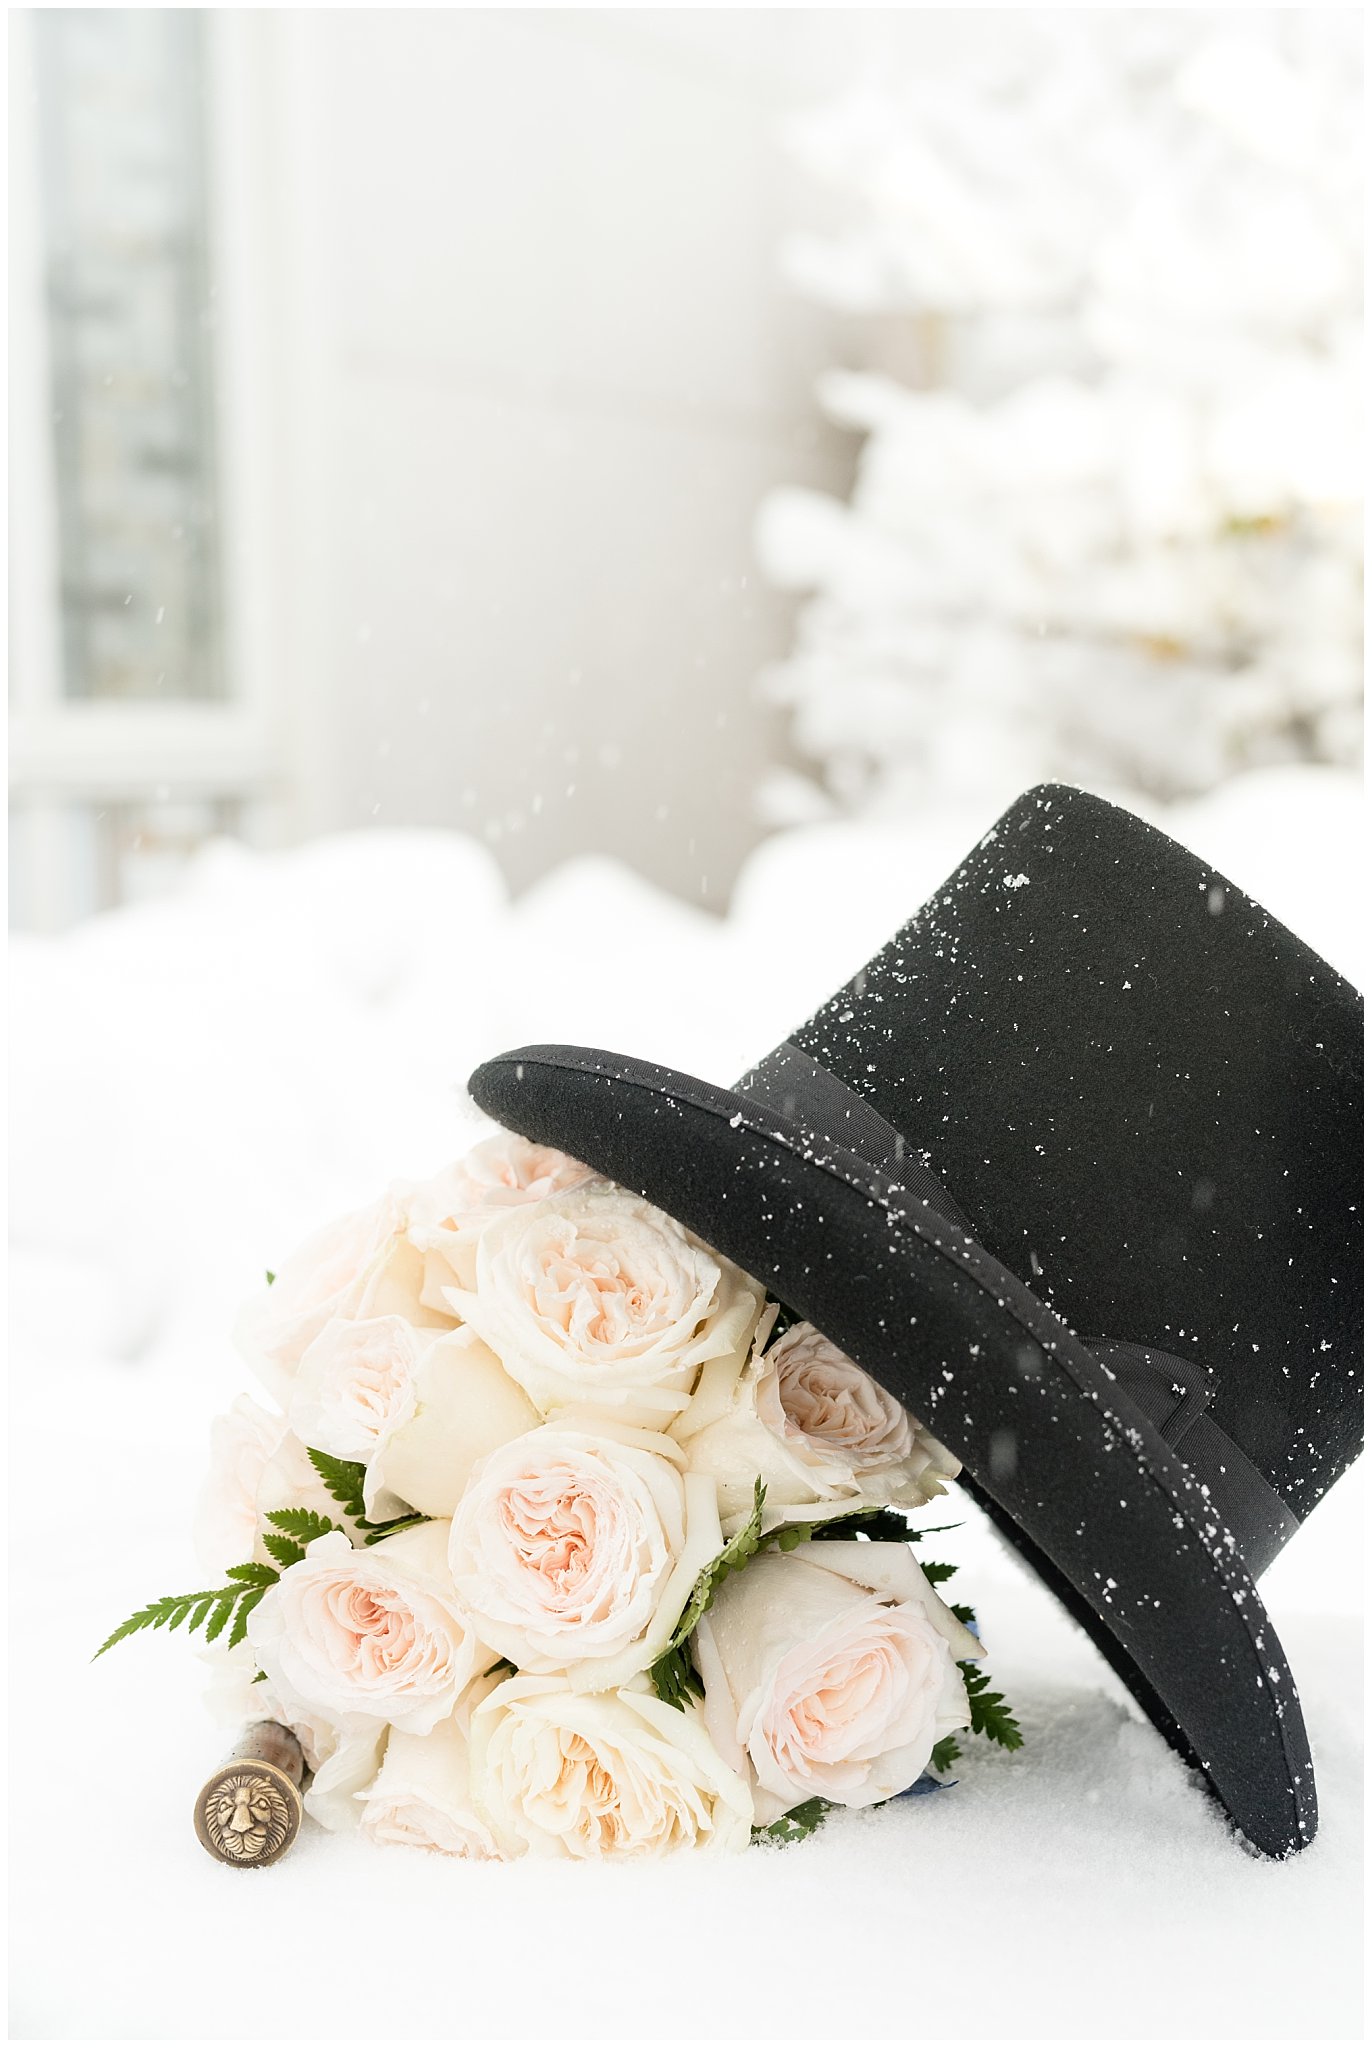 Bountiful Utah Temple Wedding | Top hat and white roses in the snow | Jessie and Dallin Photography